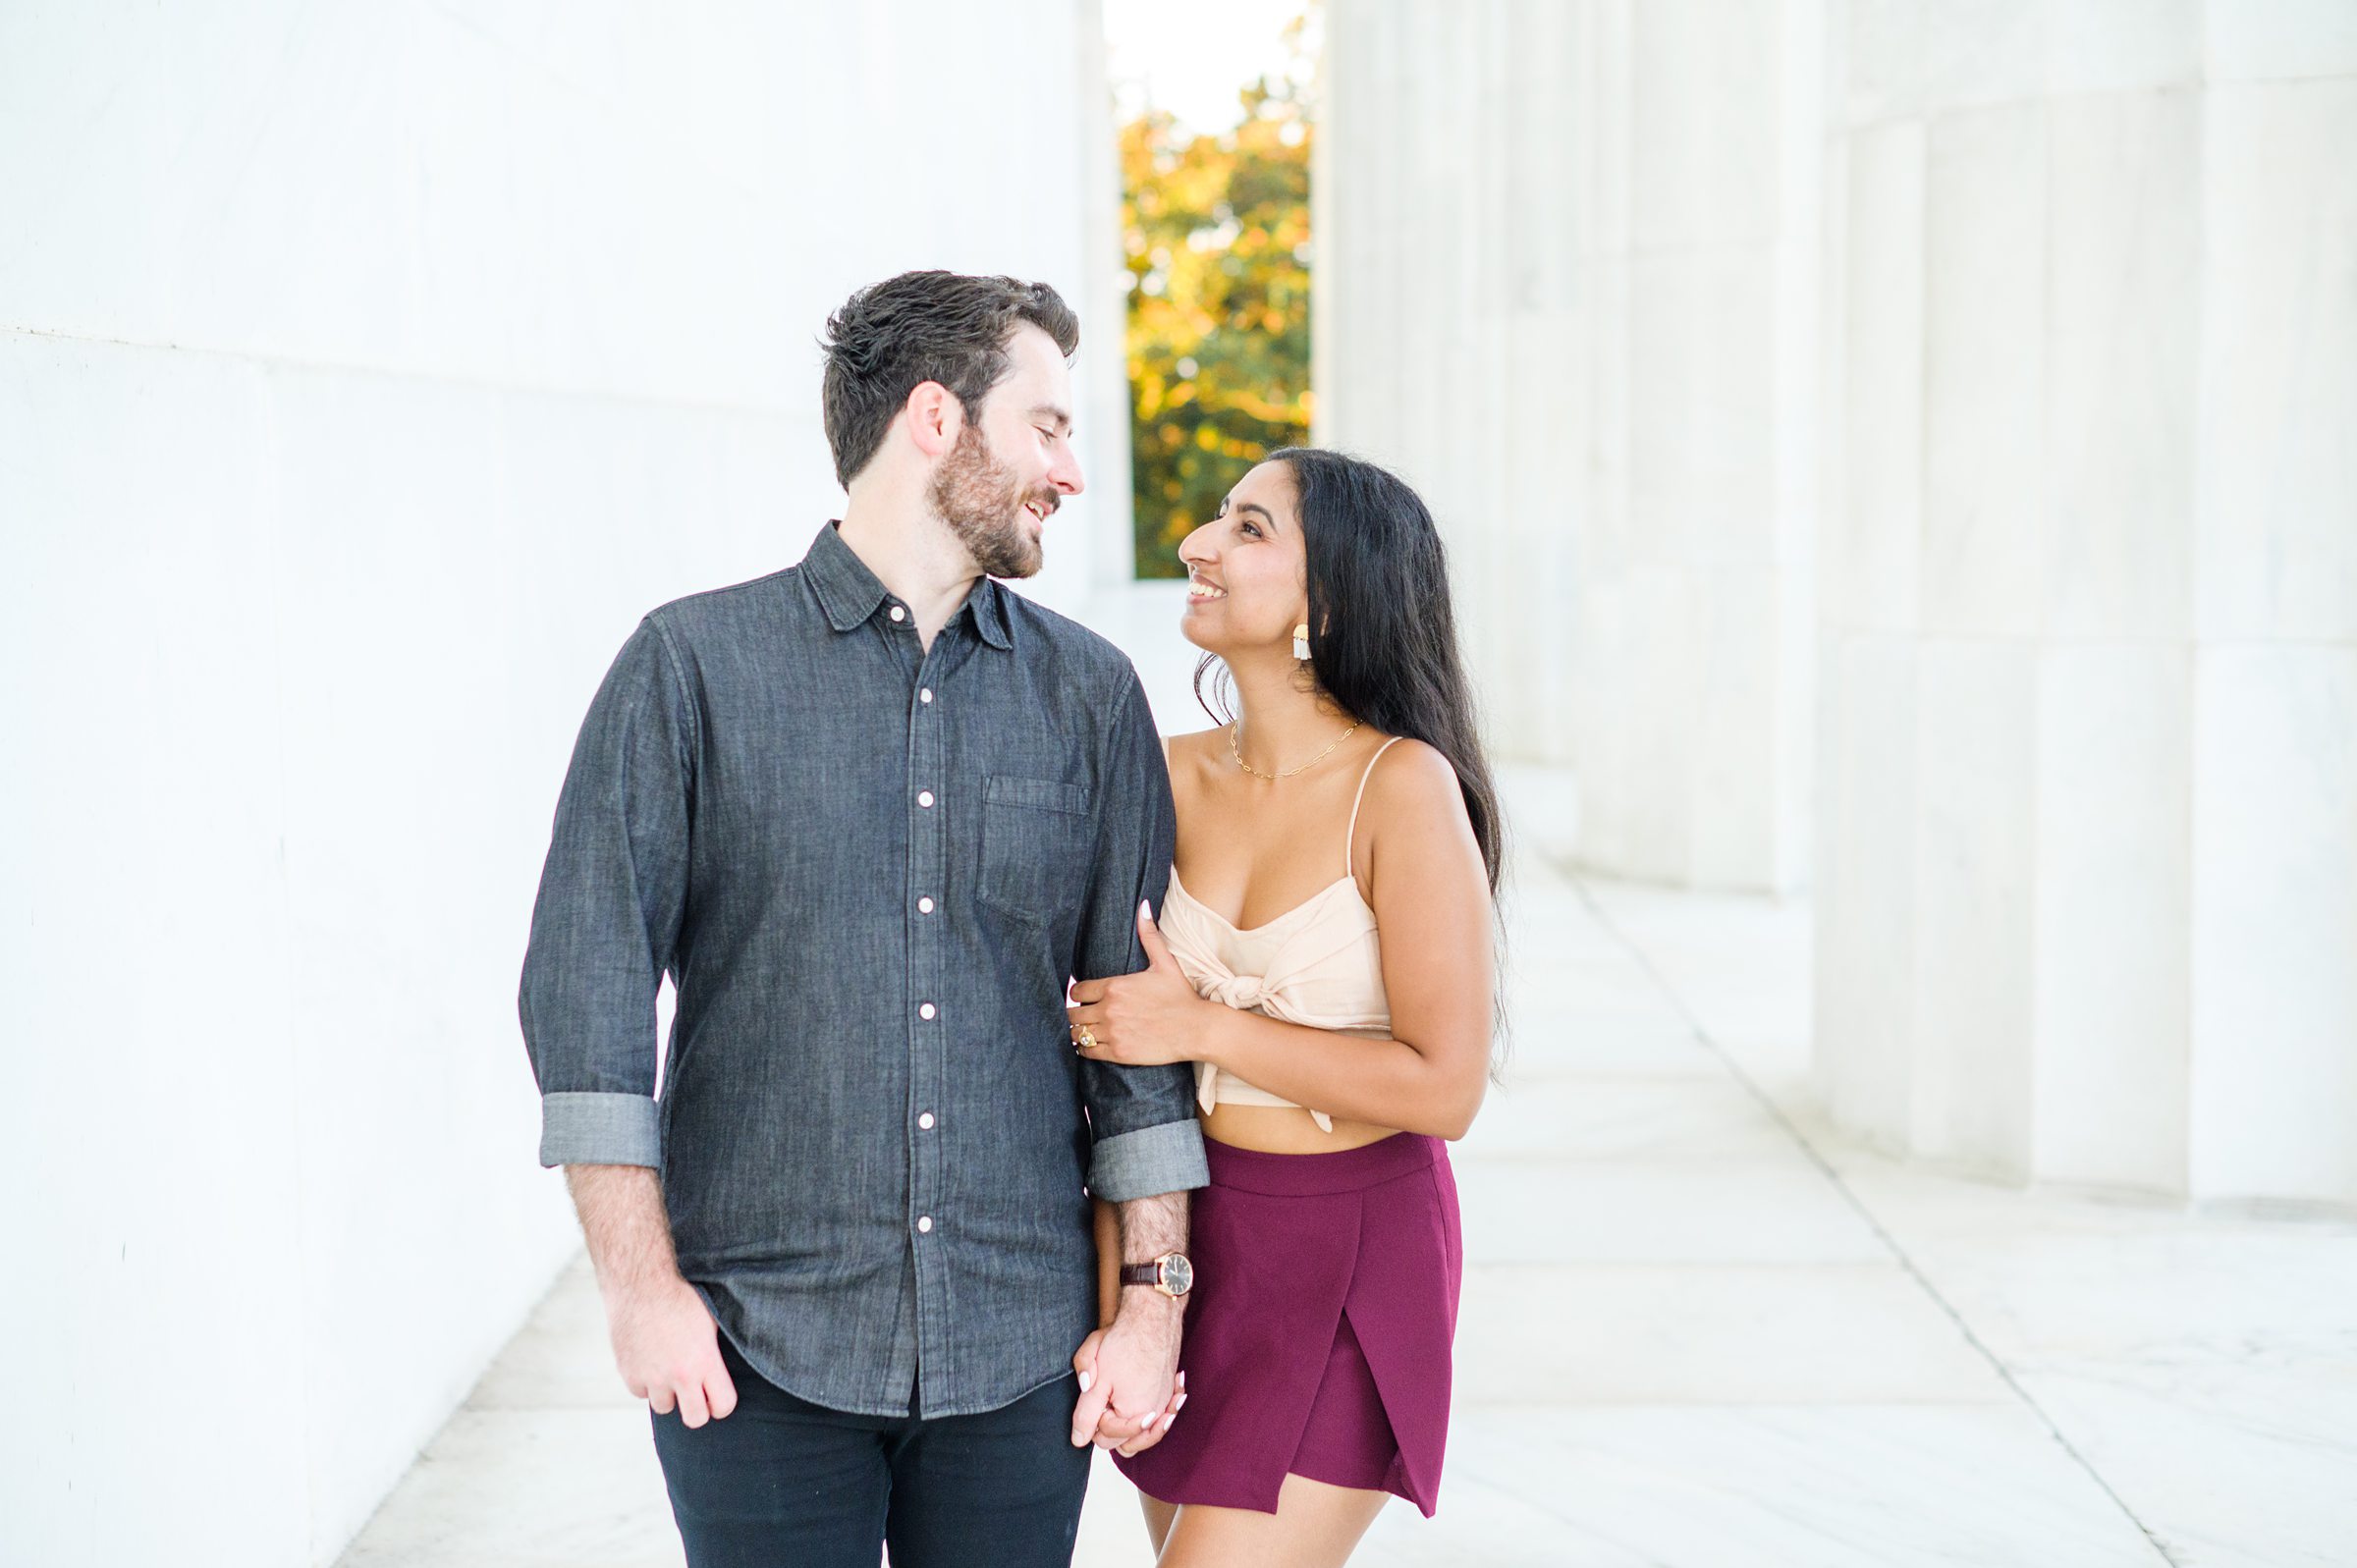 With iconic views and a couple this sweet, Lincoln Memorial surprise proposals are always a sweet idea! This proposal was the sweetest surprise photographed by Baltimore proposal photographer, Cait Kramer.